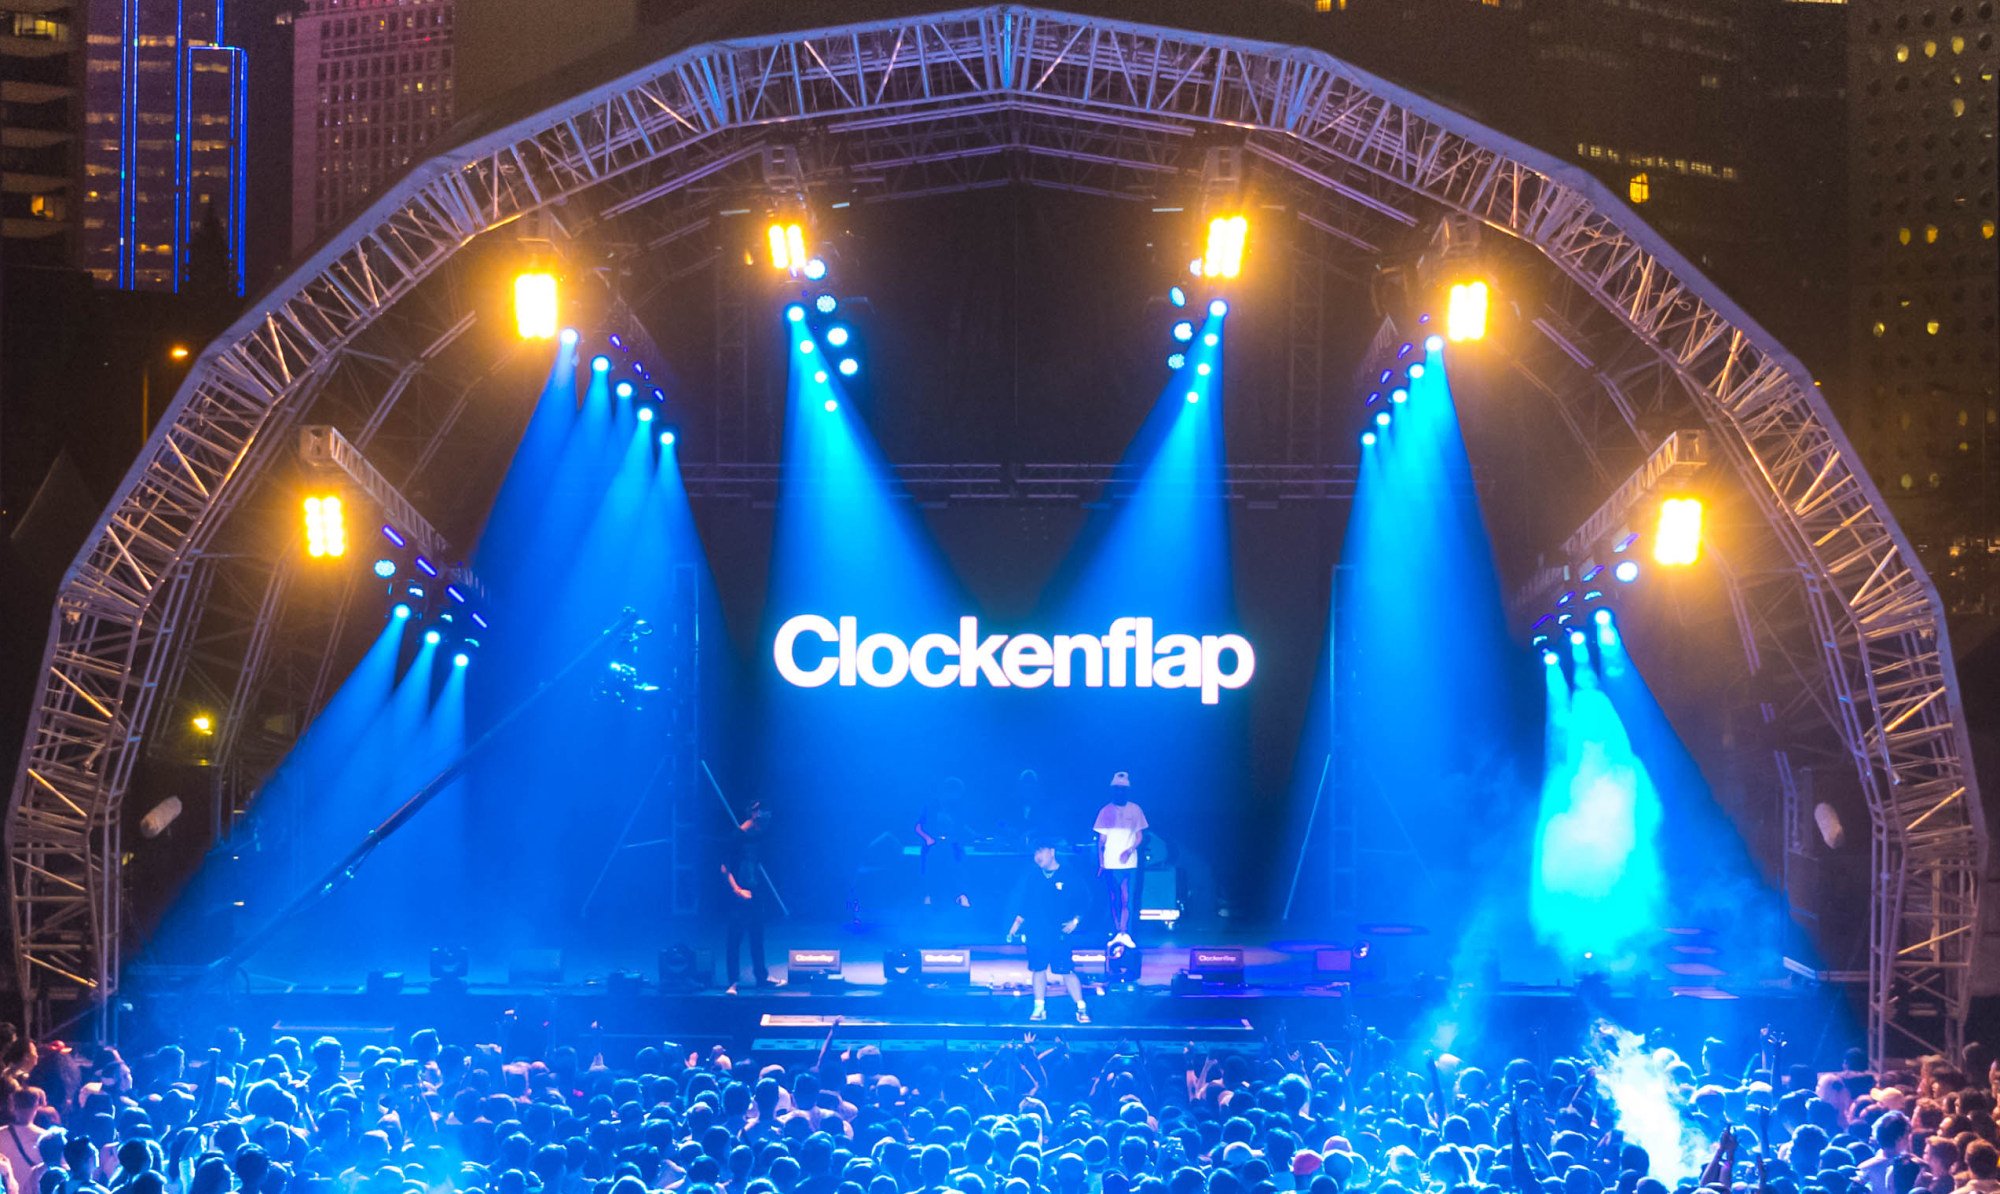 The Clockenflap music festival was a fixture in Hong Kong until the 2019 social unrest struck, followed by the pandemic. Photo: SCMP